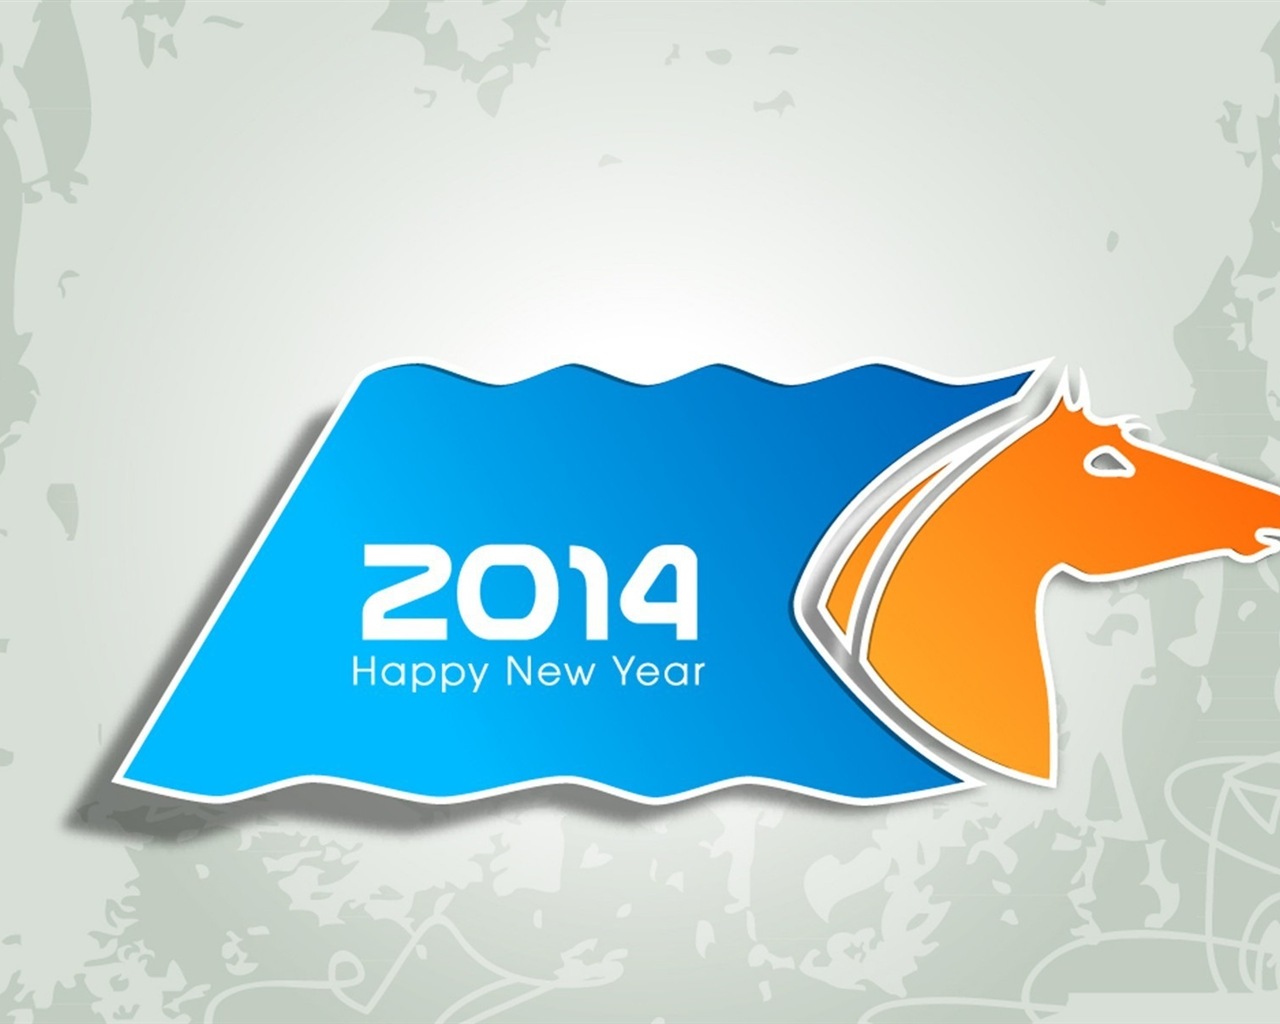 2014 New Year Theme HD Wallpapers (1) #10 - 1280x1024